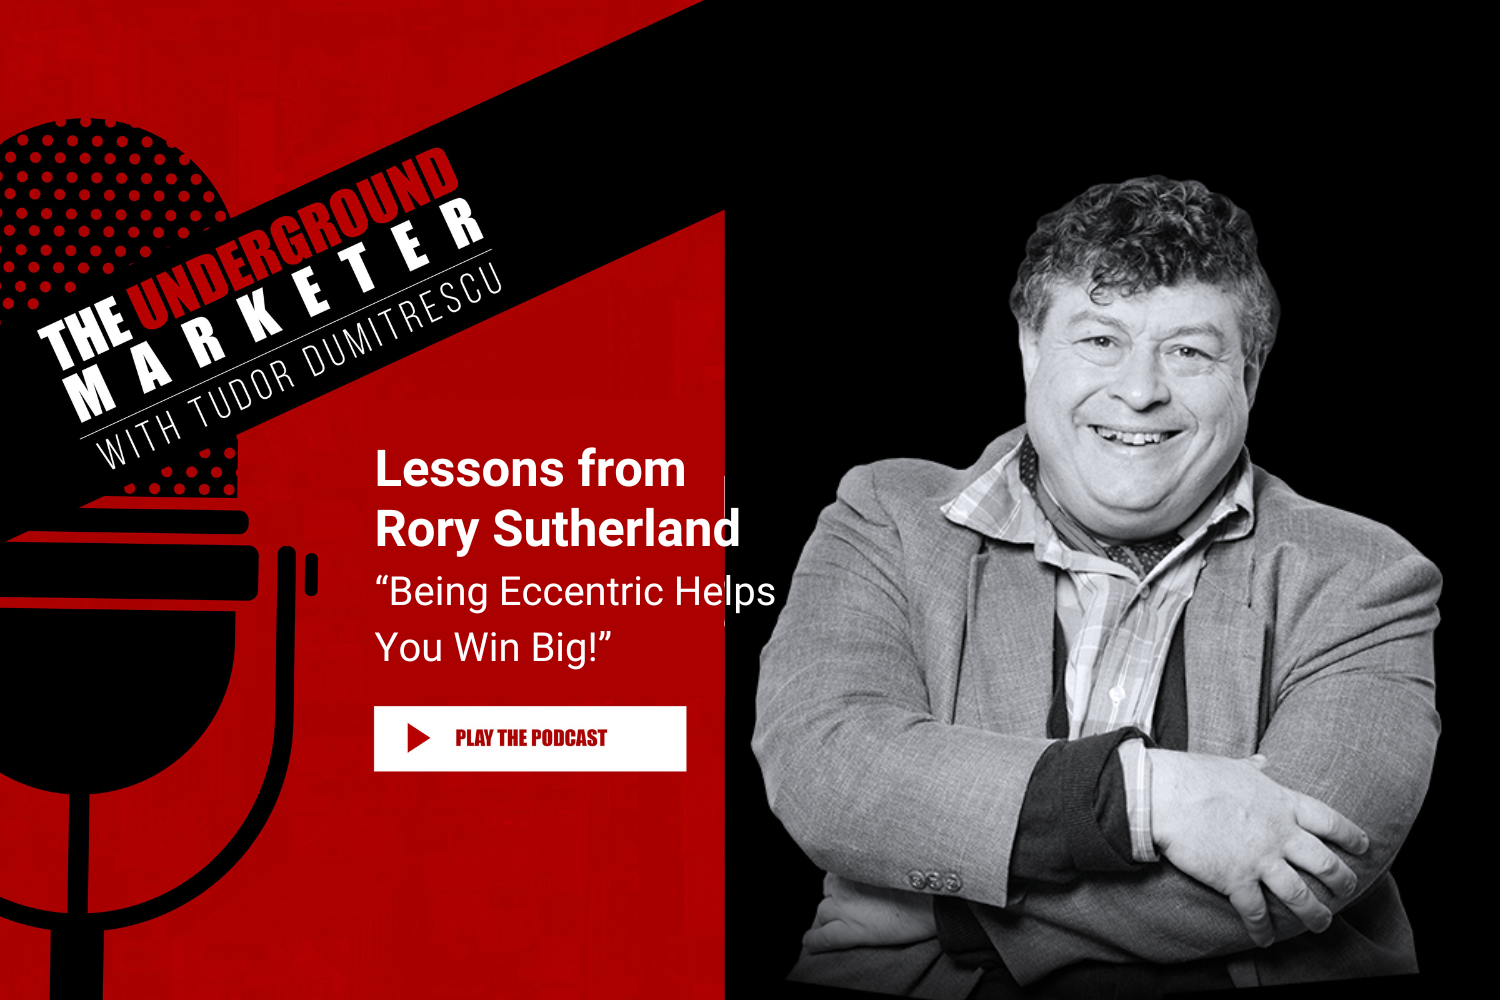 Podcast Episode 32 from the Underground Marketer Podcast: Lessons from Rory Sutherland